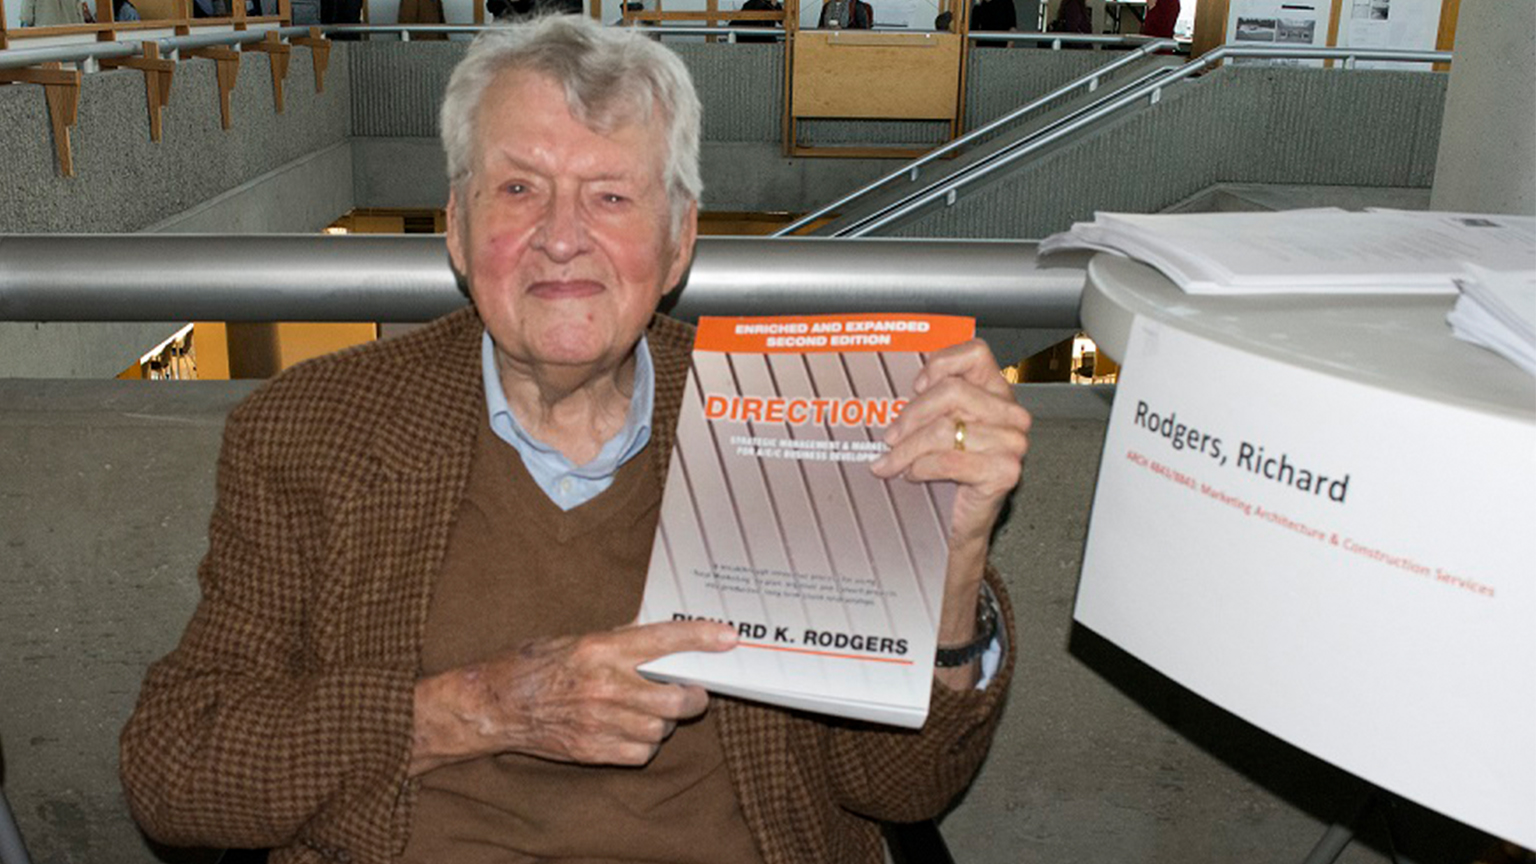 Richard Rogers with his book Directions